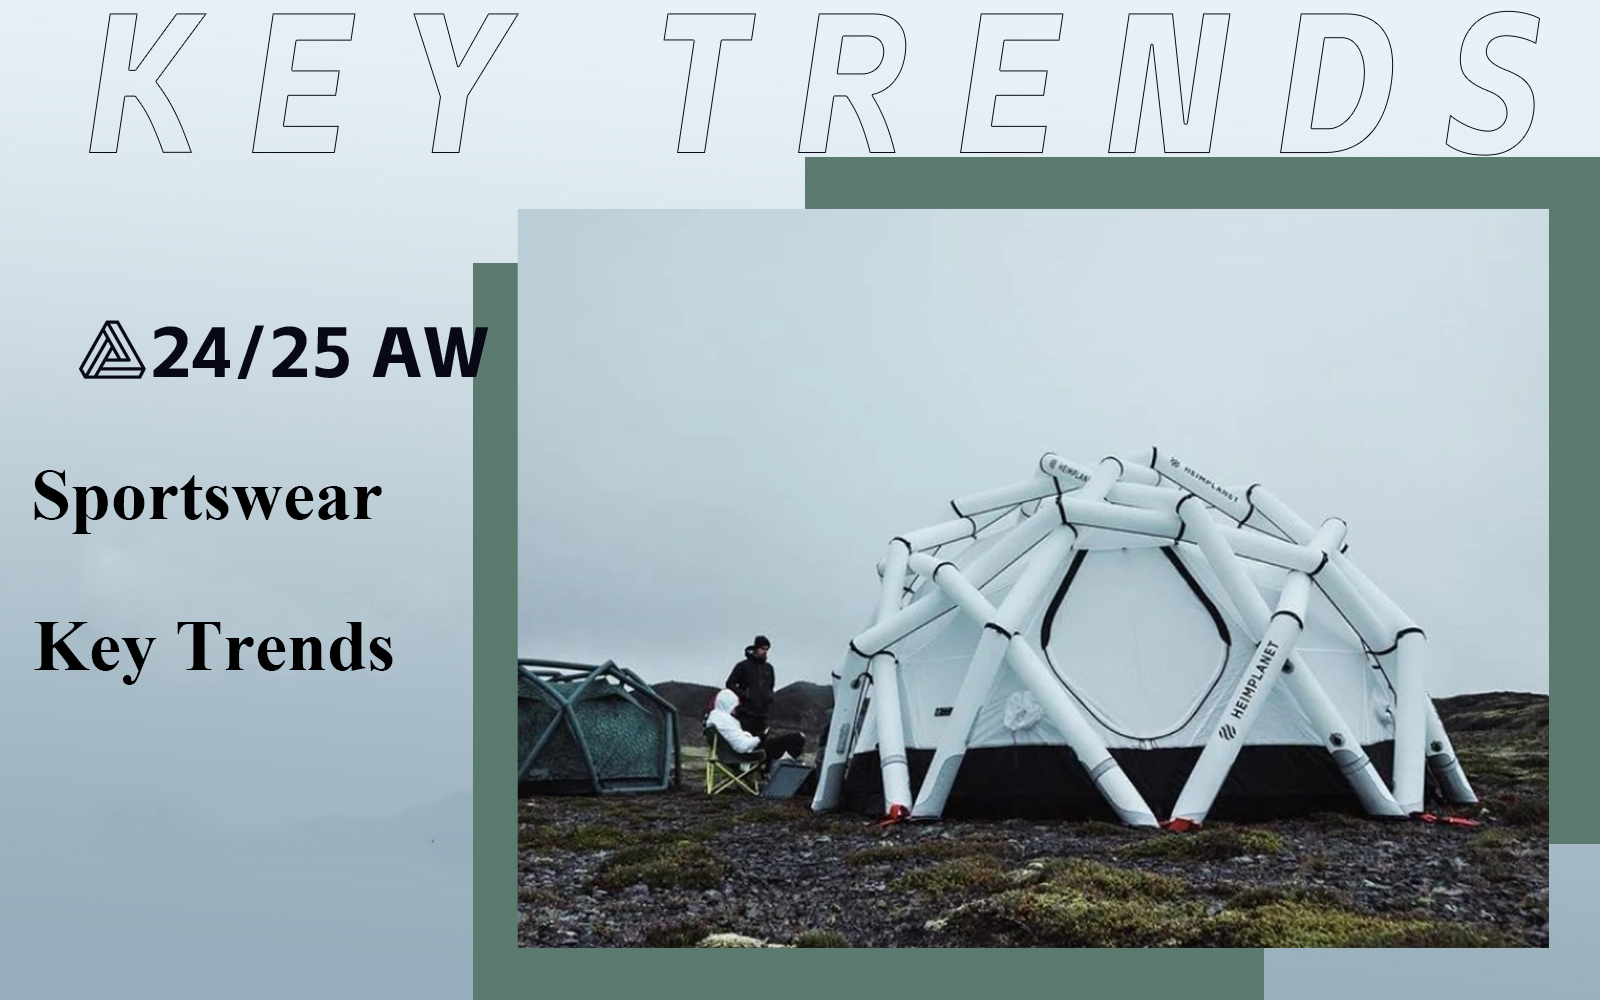 A/W 24/25 Sports & Outdoor Key Trends